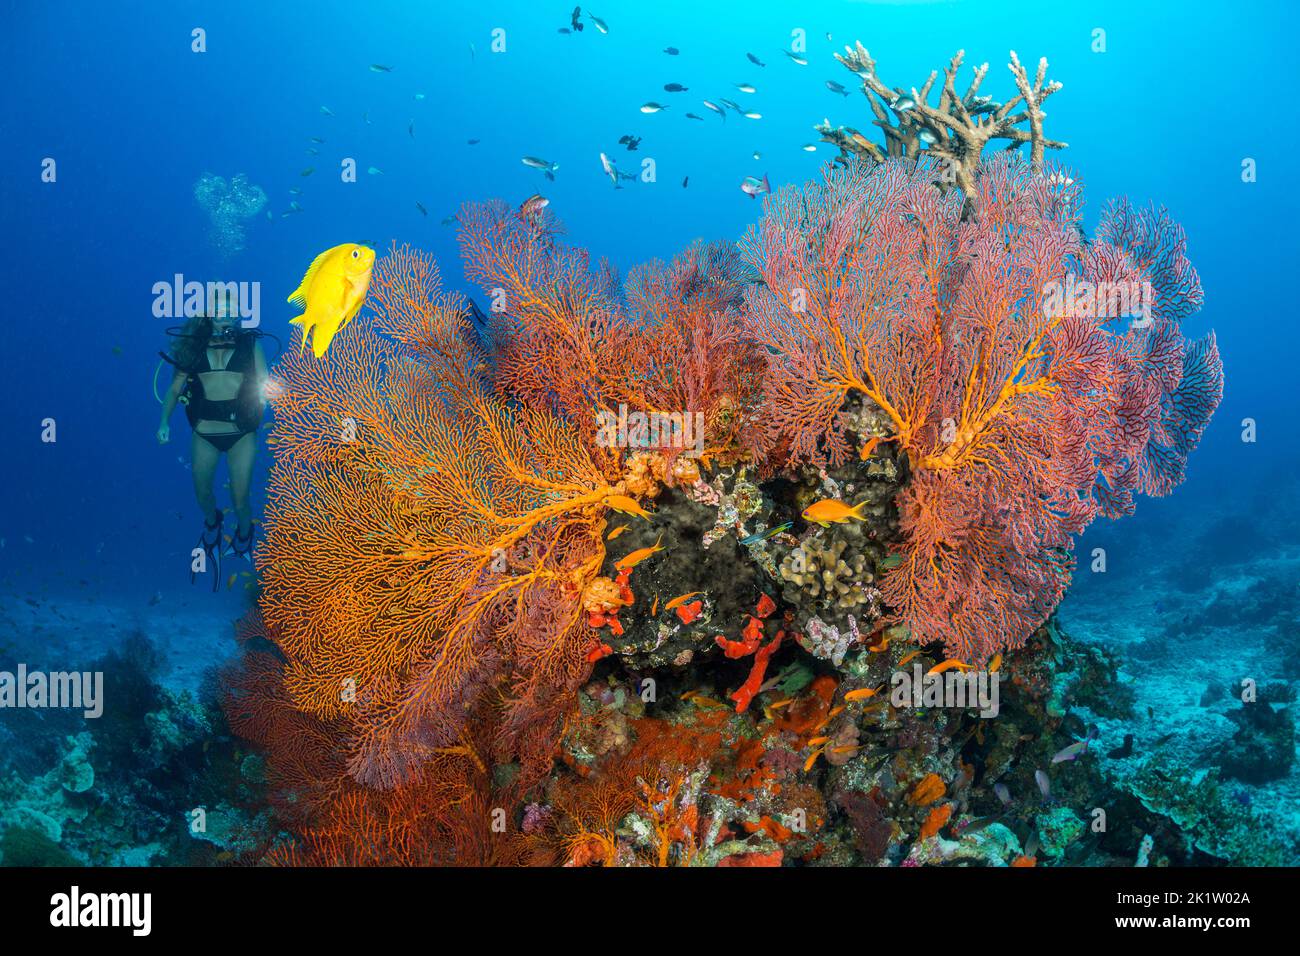 Diver (MR) and a coral head covered with gorgonian fans and a yellow damselfish, Fiji. Stock Photo